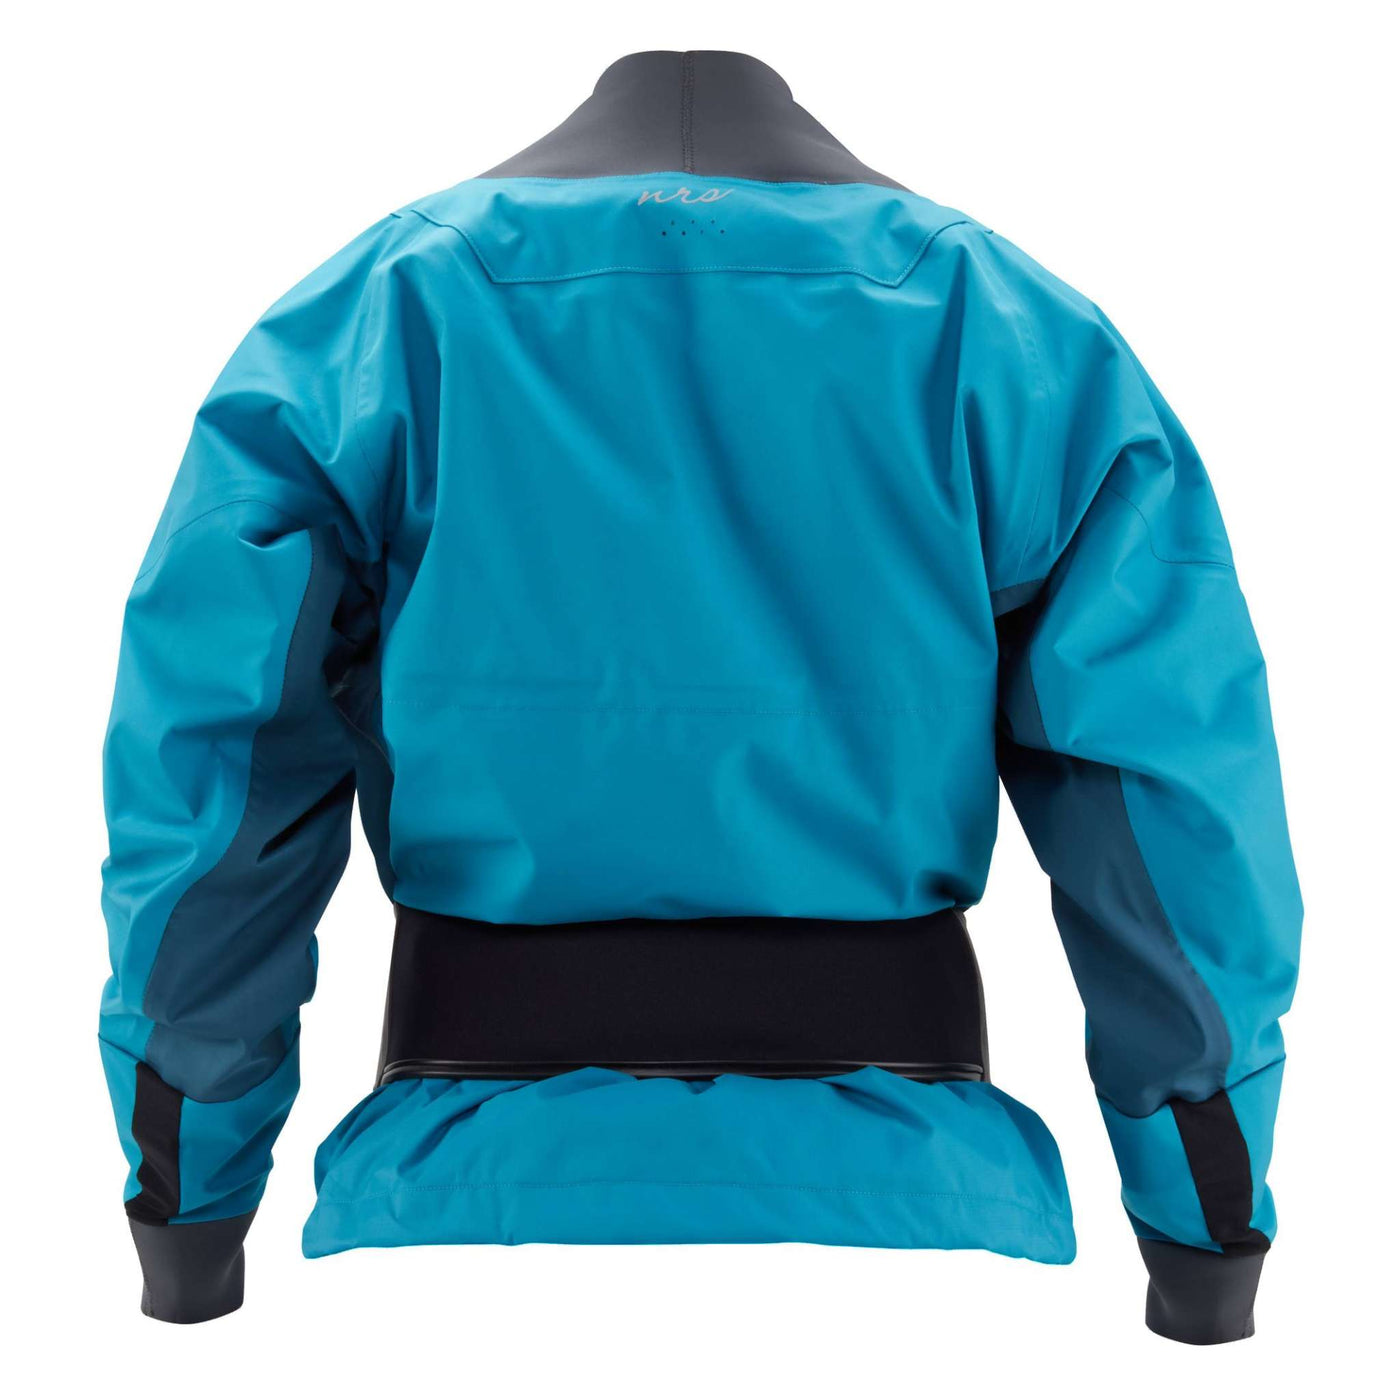 NRS Flux Dry Top - Womens | White Water Kayaking Clothing | Further Faster Christchurch NZ #fjord